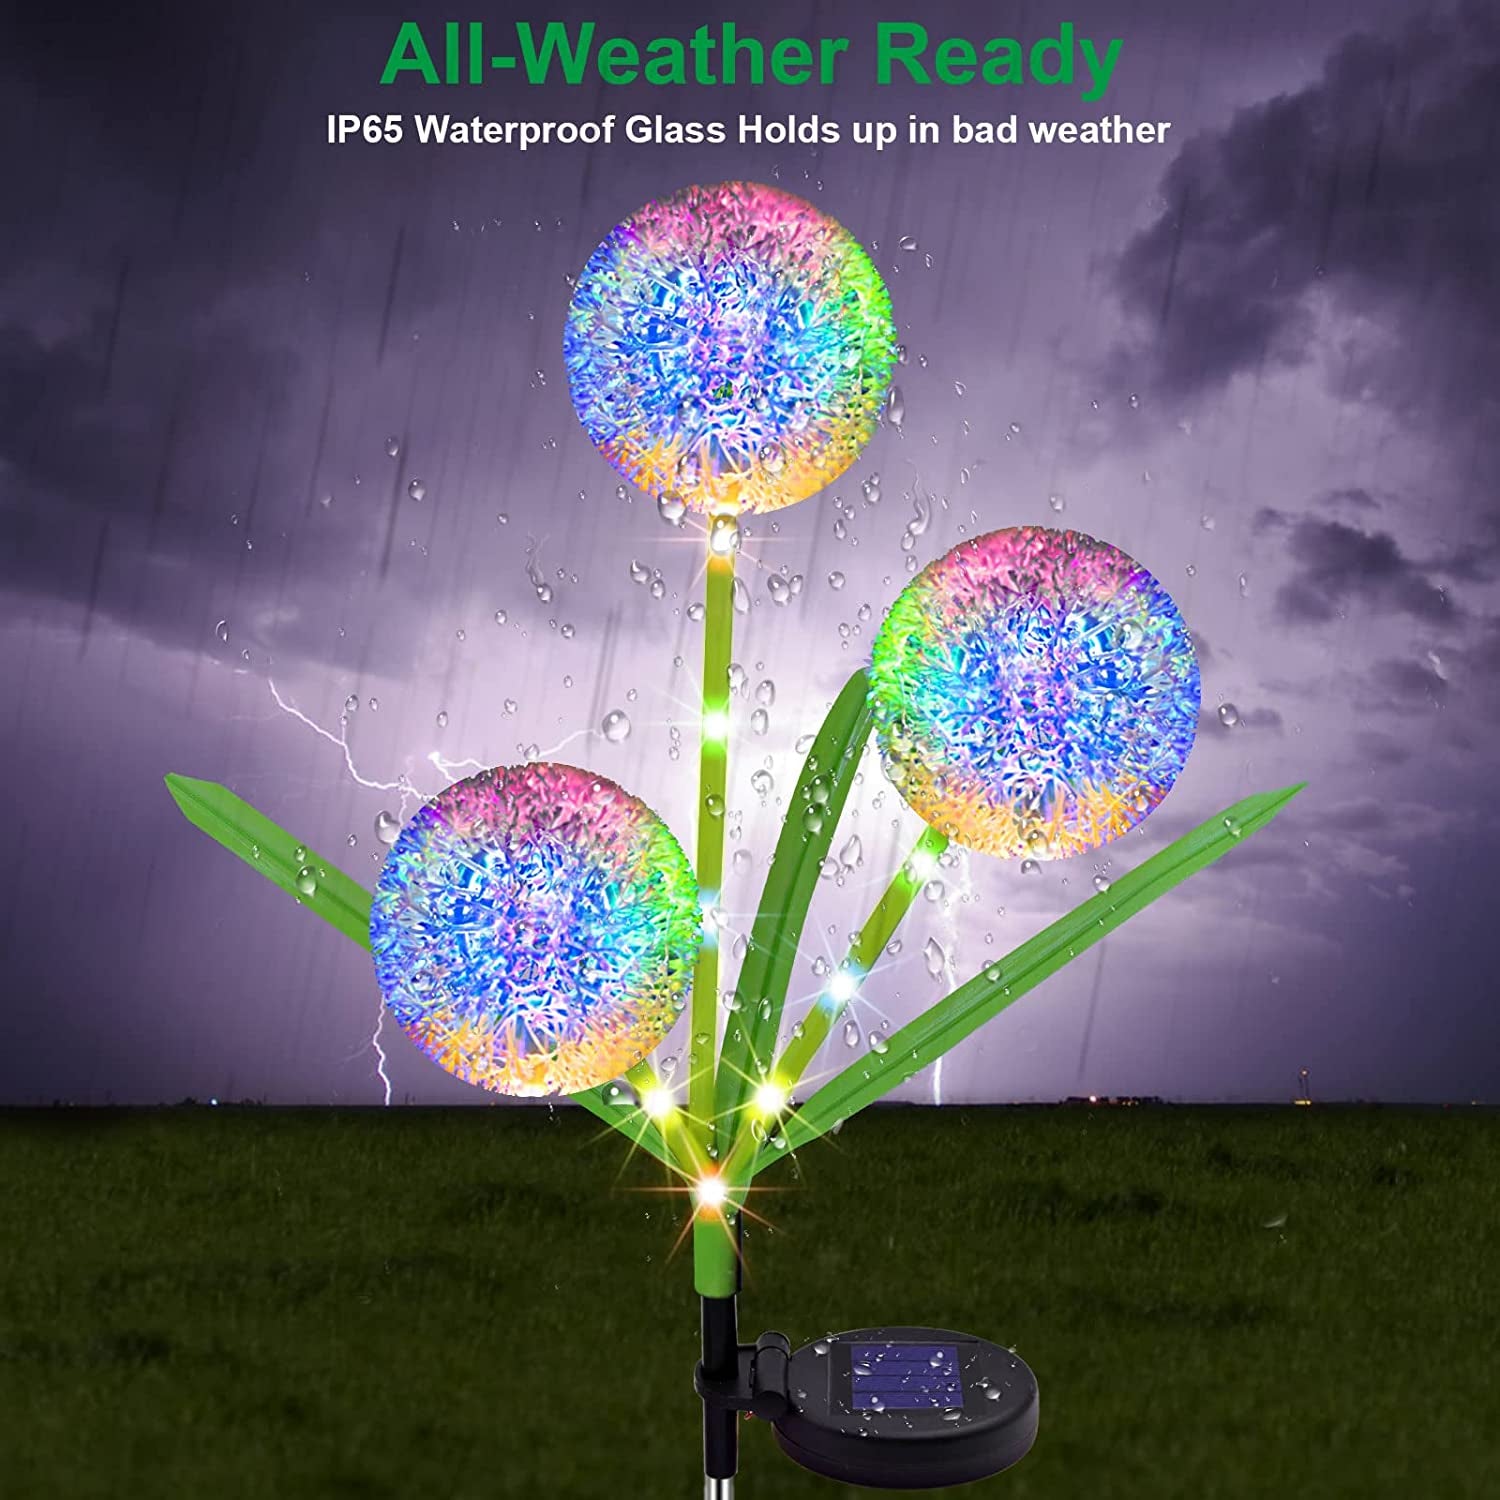  Solar Garden Lights,3-in-1 Colorful Solar Dandelion Lights,2 Modes Solar Dandelion Garden Decorative Lights for Pathway, Patio, Front Yard Decoration(Dandelion)